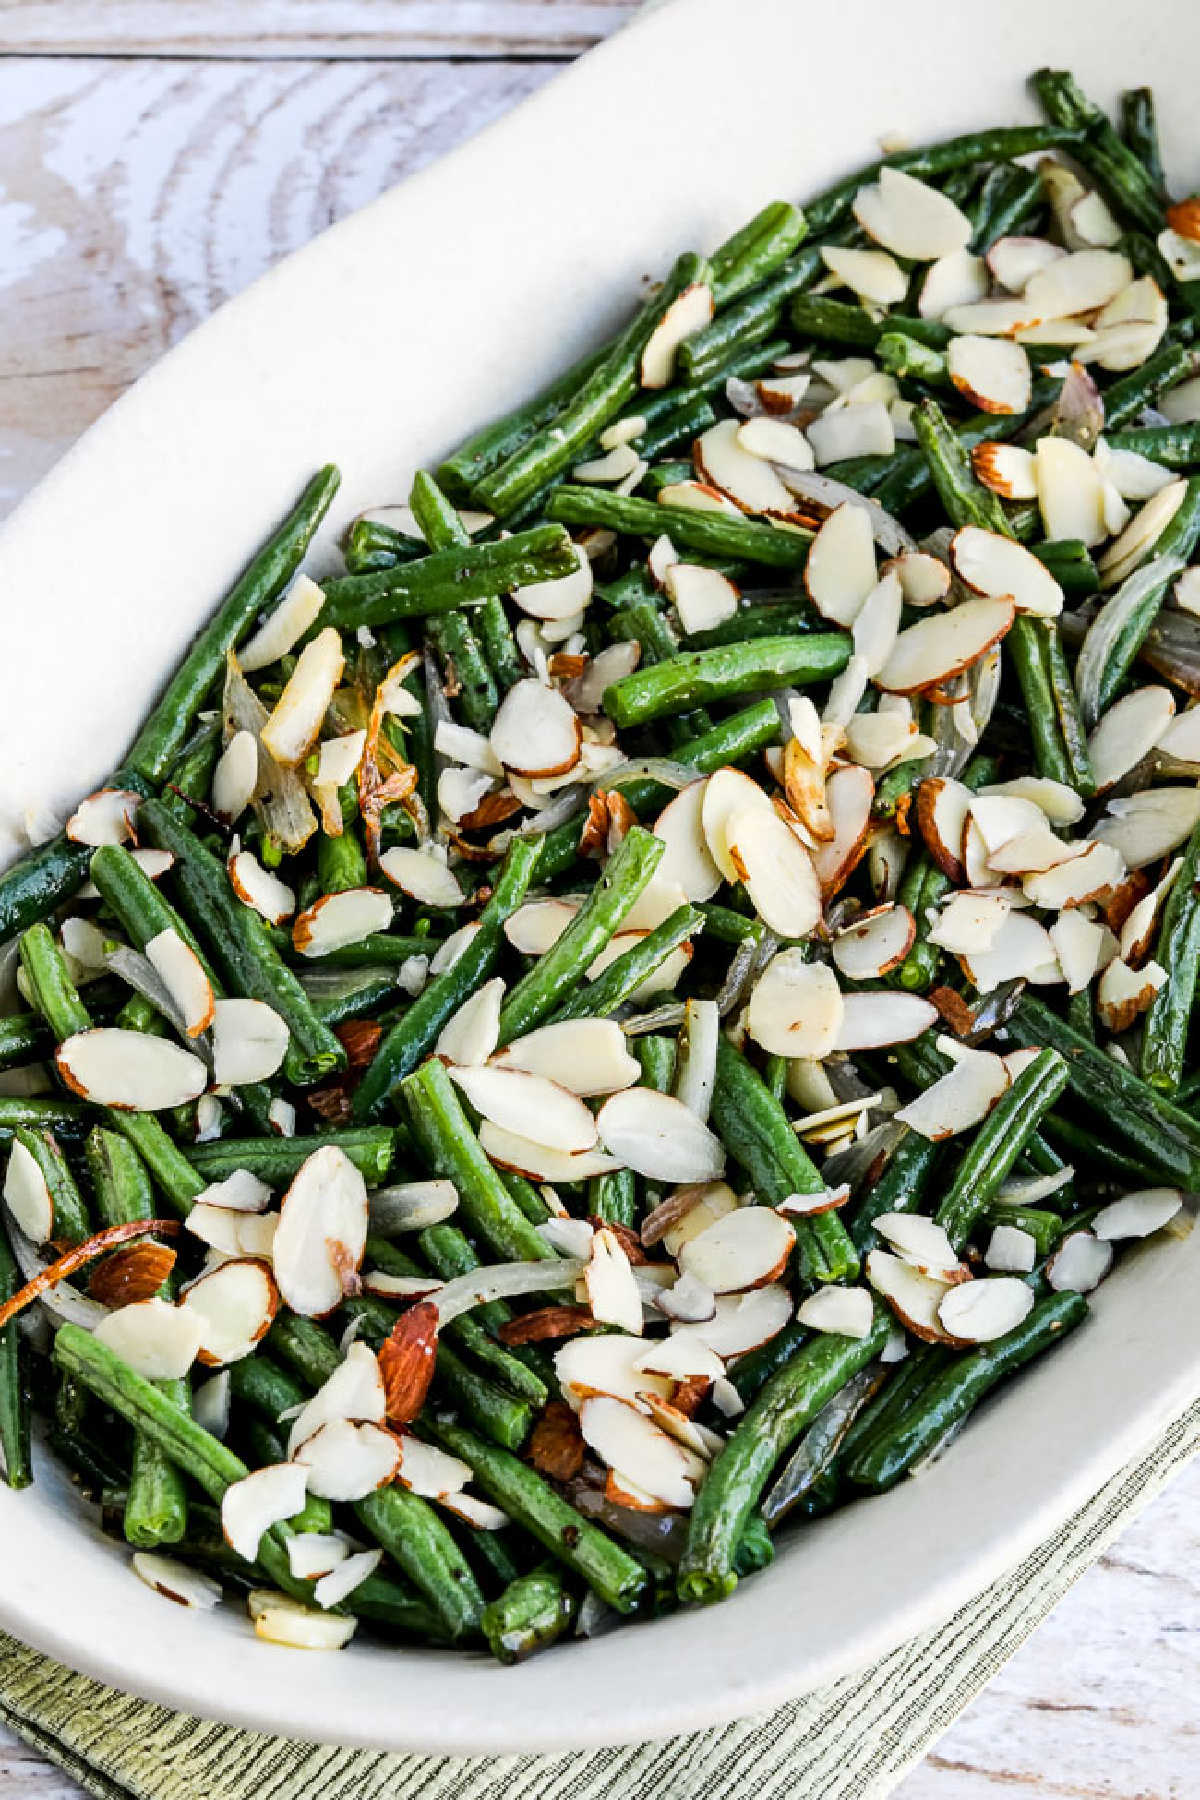 Garlic-Roasted Green Beans with Shallots and Almonds shown on serving platter, close-up image